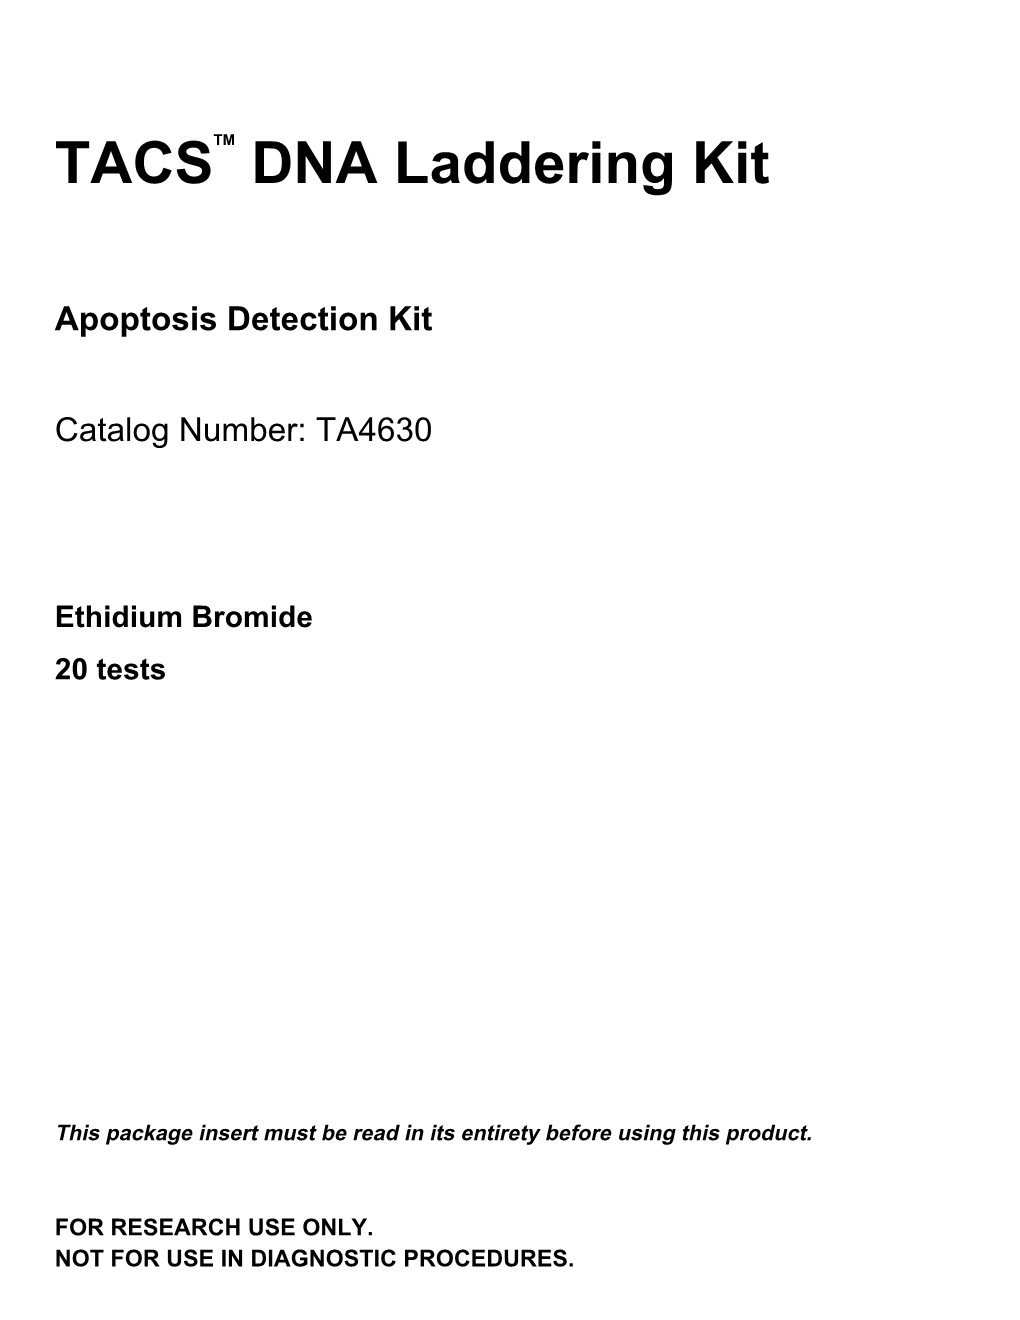 Apoptotic DNA Laddering Kits Are Used to Assay Cells and Tissues for Apoptosis by Detecting Internucleosomal DNA Fragmentation and Displaying DNA Laddering